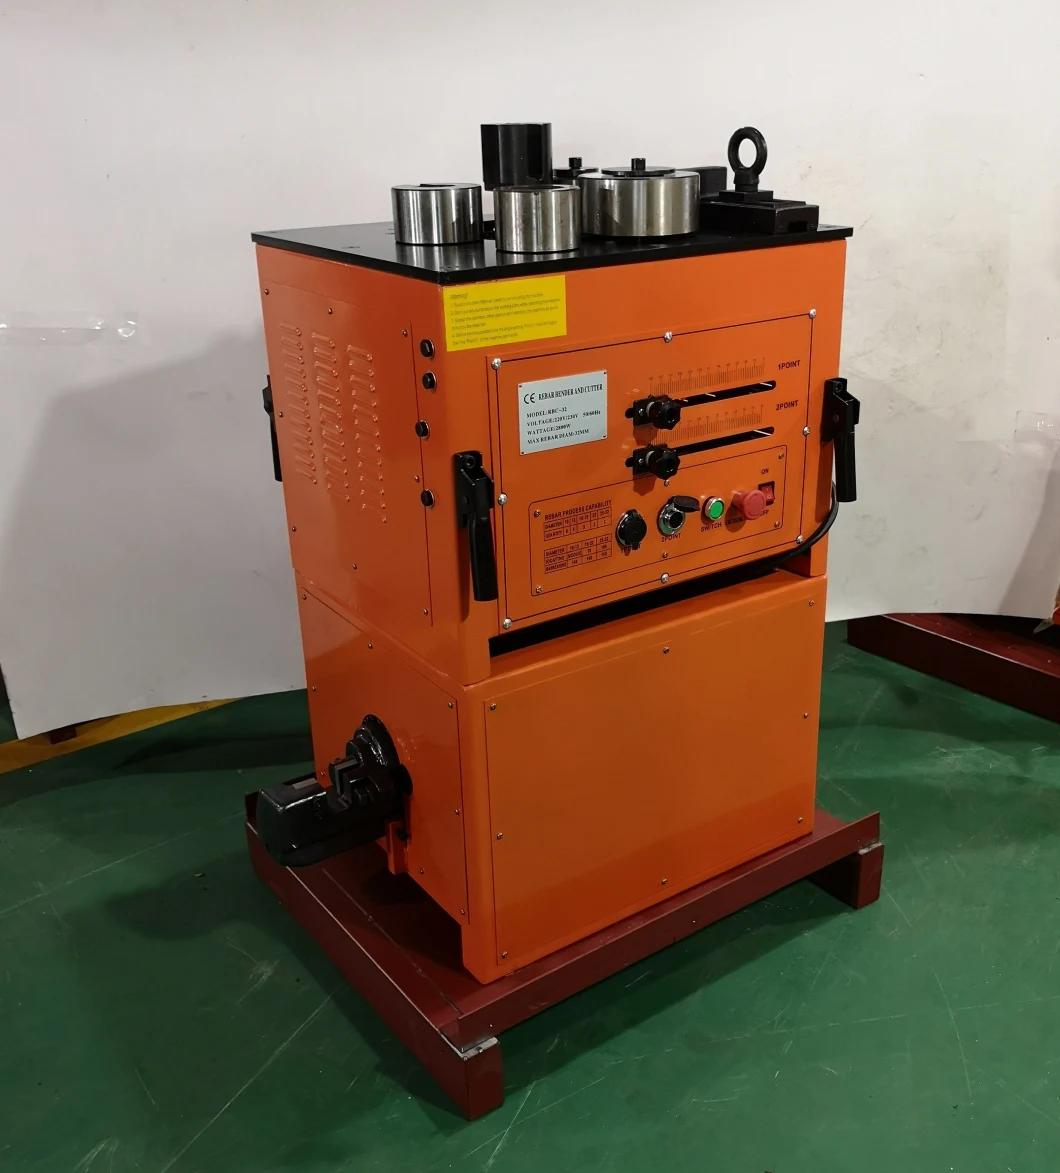 Rbc-32 Hydraulic Rebar Steel Bar Wire Rod Stirrup Bending and Cutting Machine with CE Certification